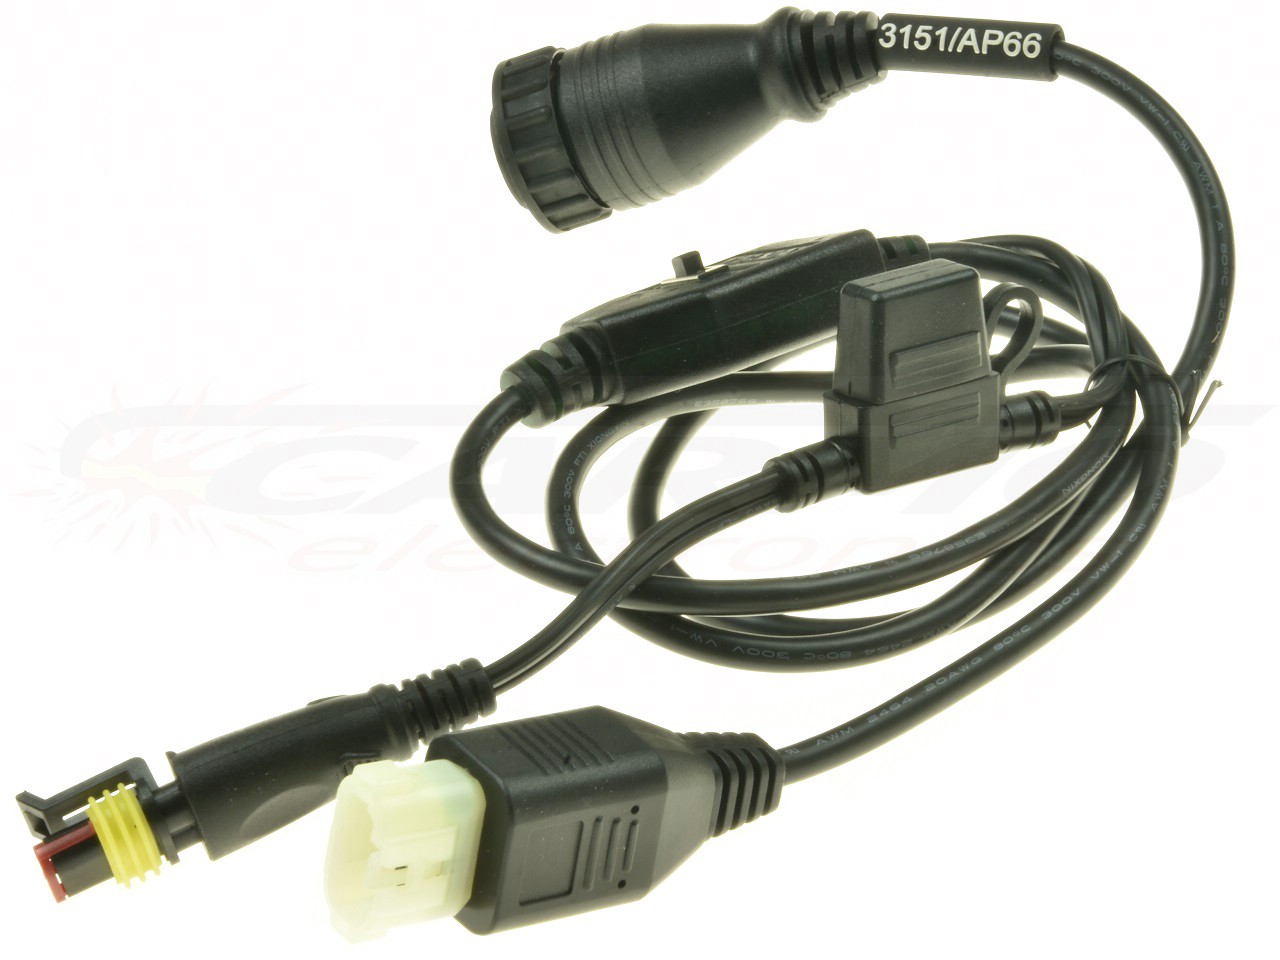 3151/AP66 Motorcycle Yamaha cross diagnostic and power cable TEXA-3913318 - Click Image to Close